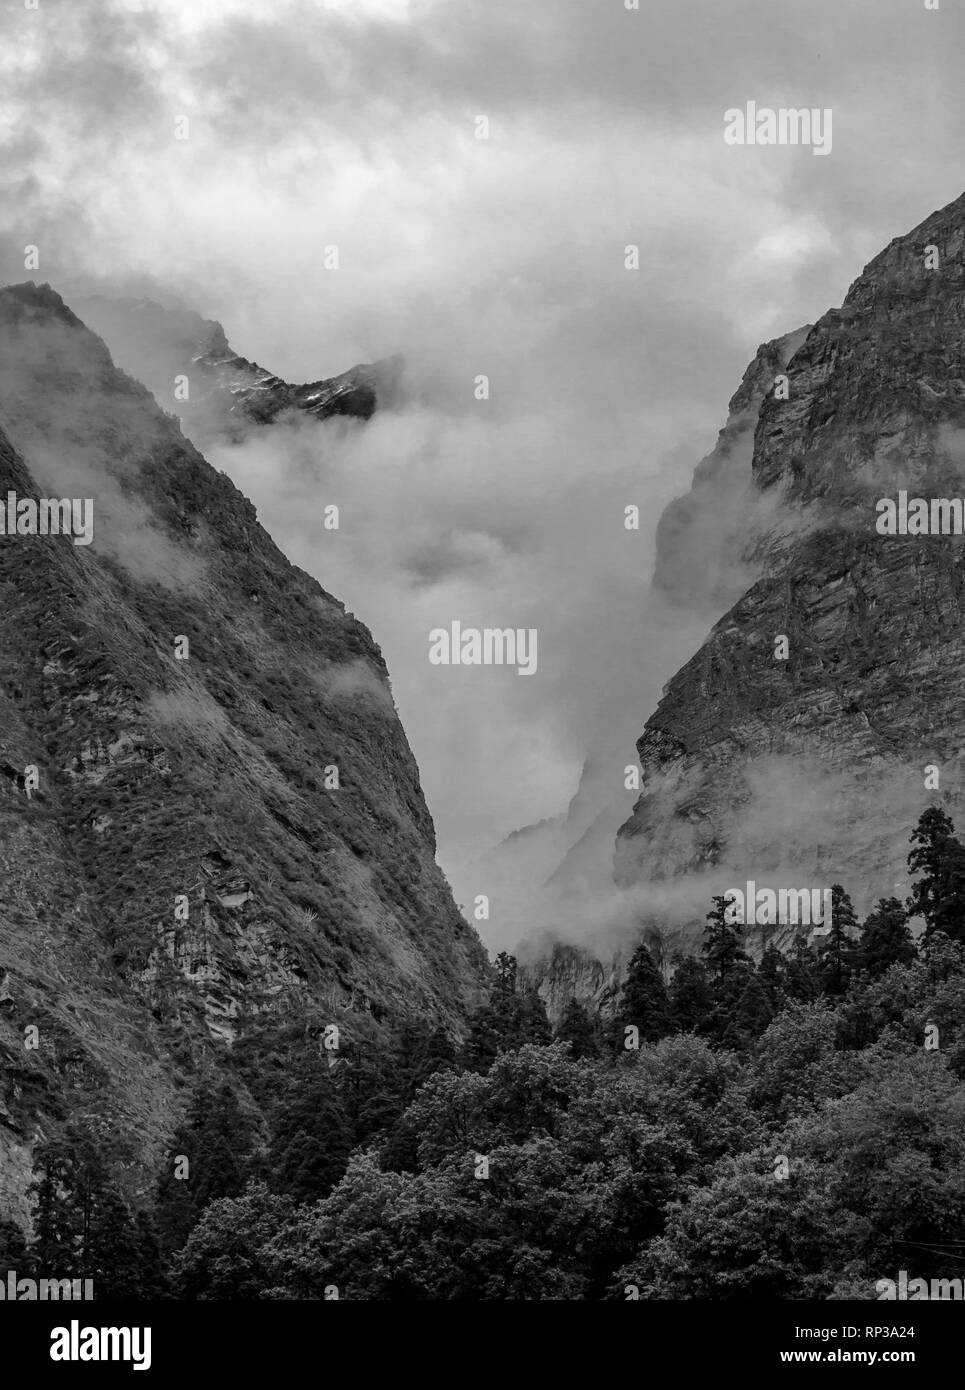 In black and white, picturesque view of Great Himalaya of India. The place in the picture is near the Valley of Flowers, Uttarakhand, India. Stock Photo